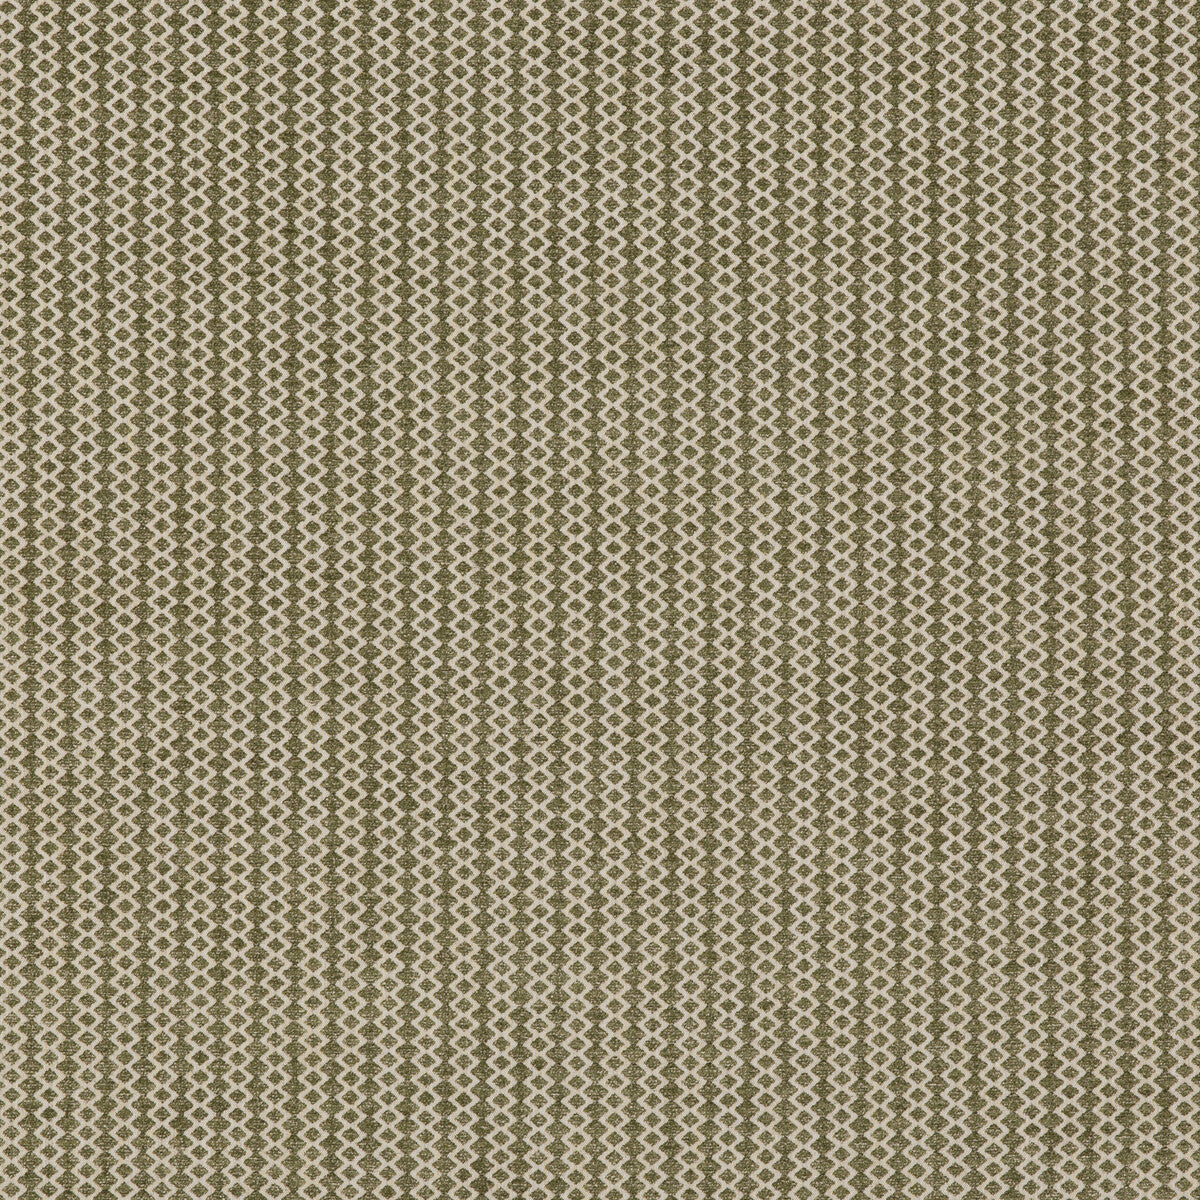 Harwood fabric in forest color - pattern BF10958.794.0 - by G P &amp; J Baker in the Baker House Textures collection